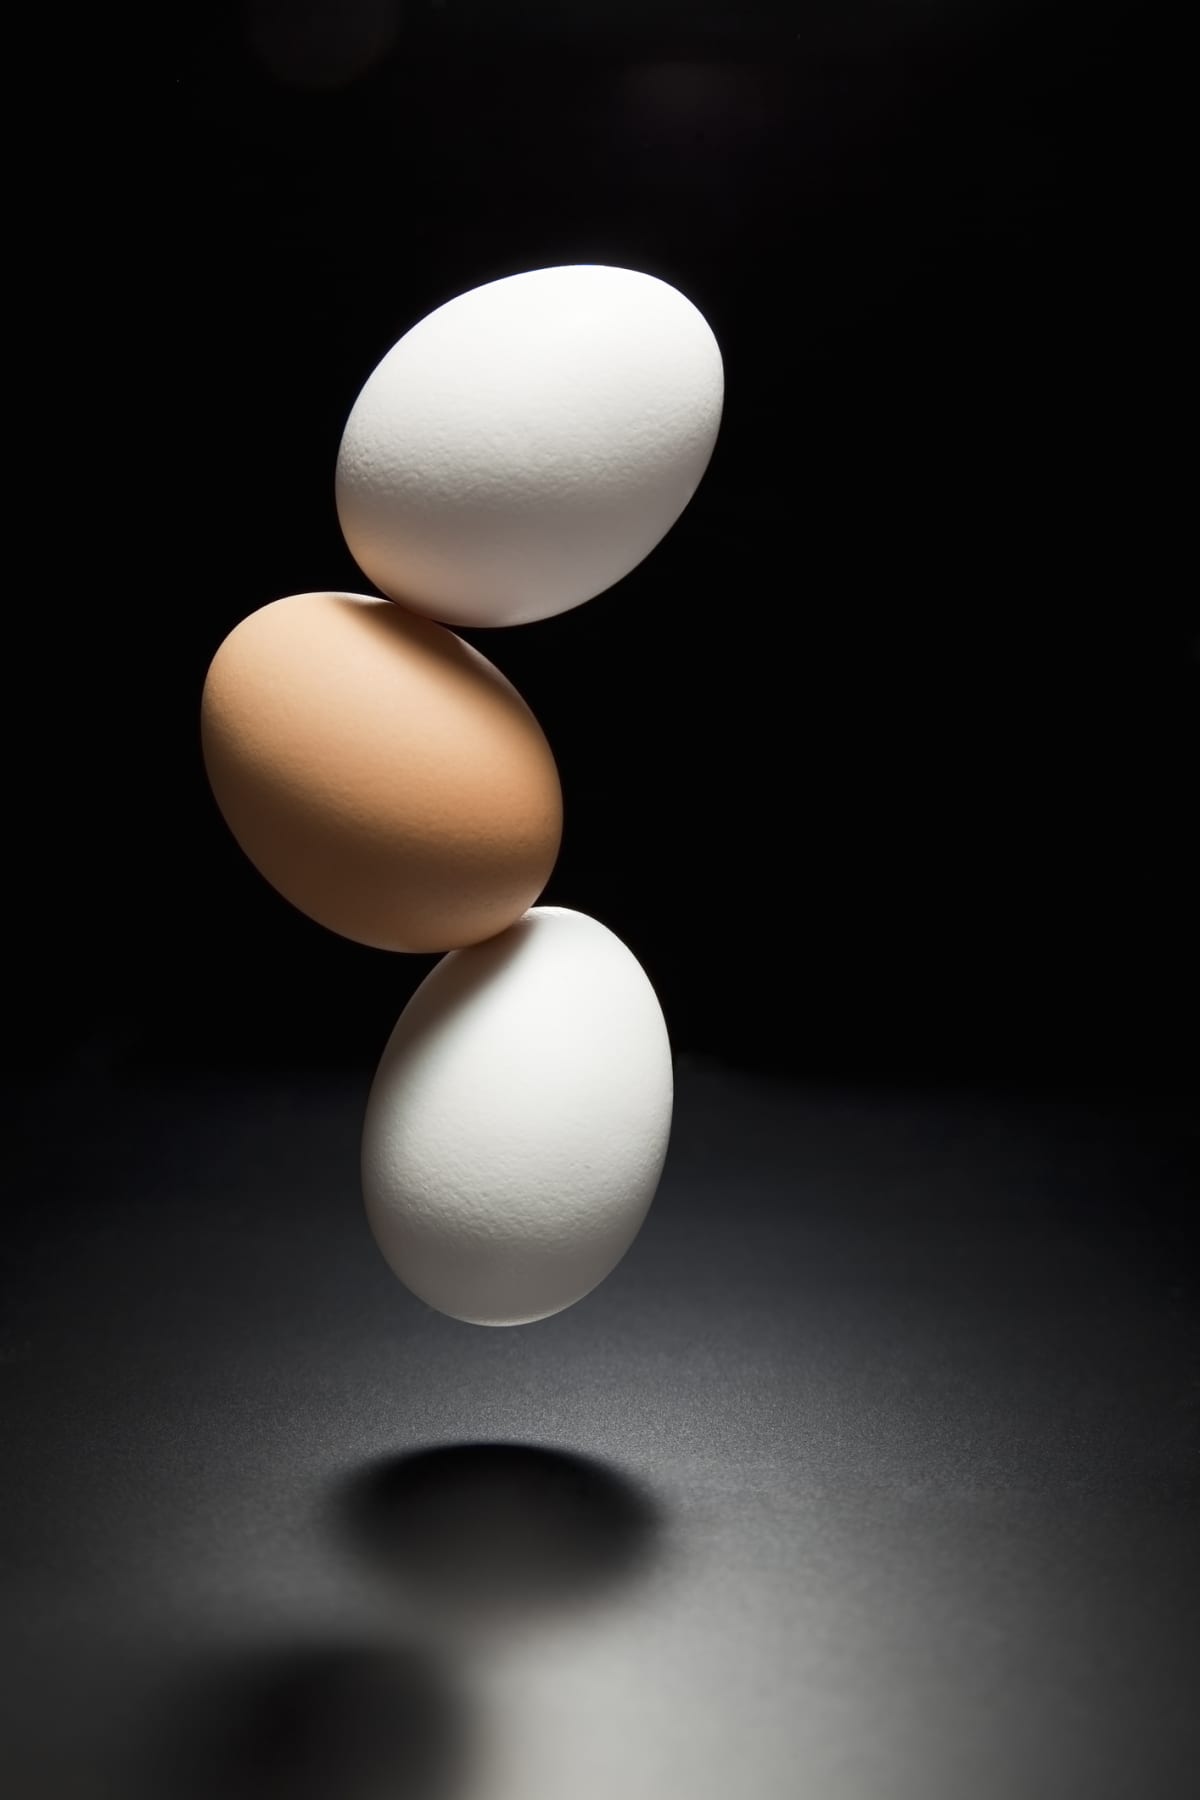 3 eggs in the air on a black background. 